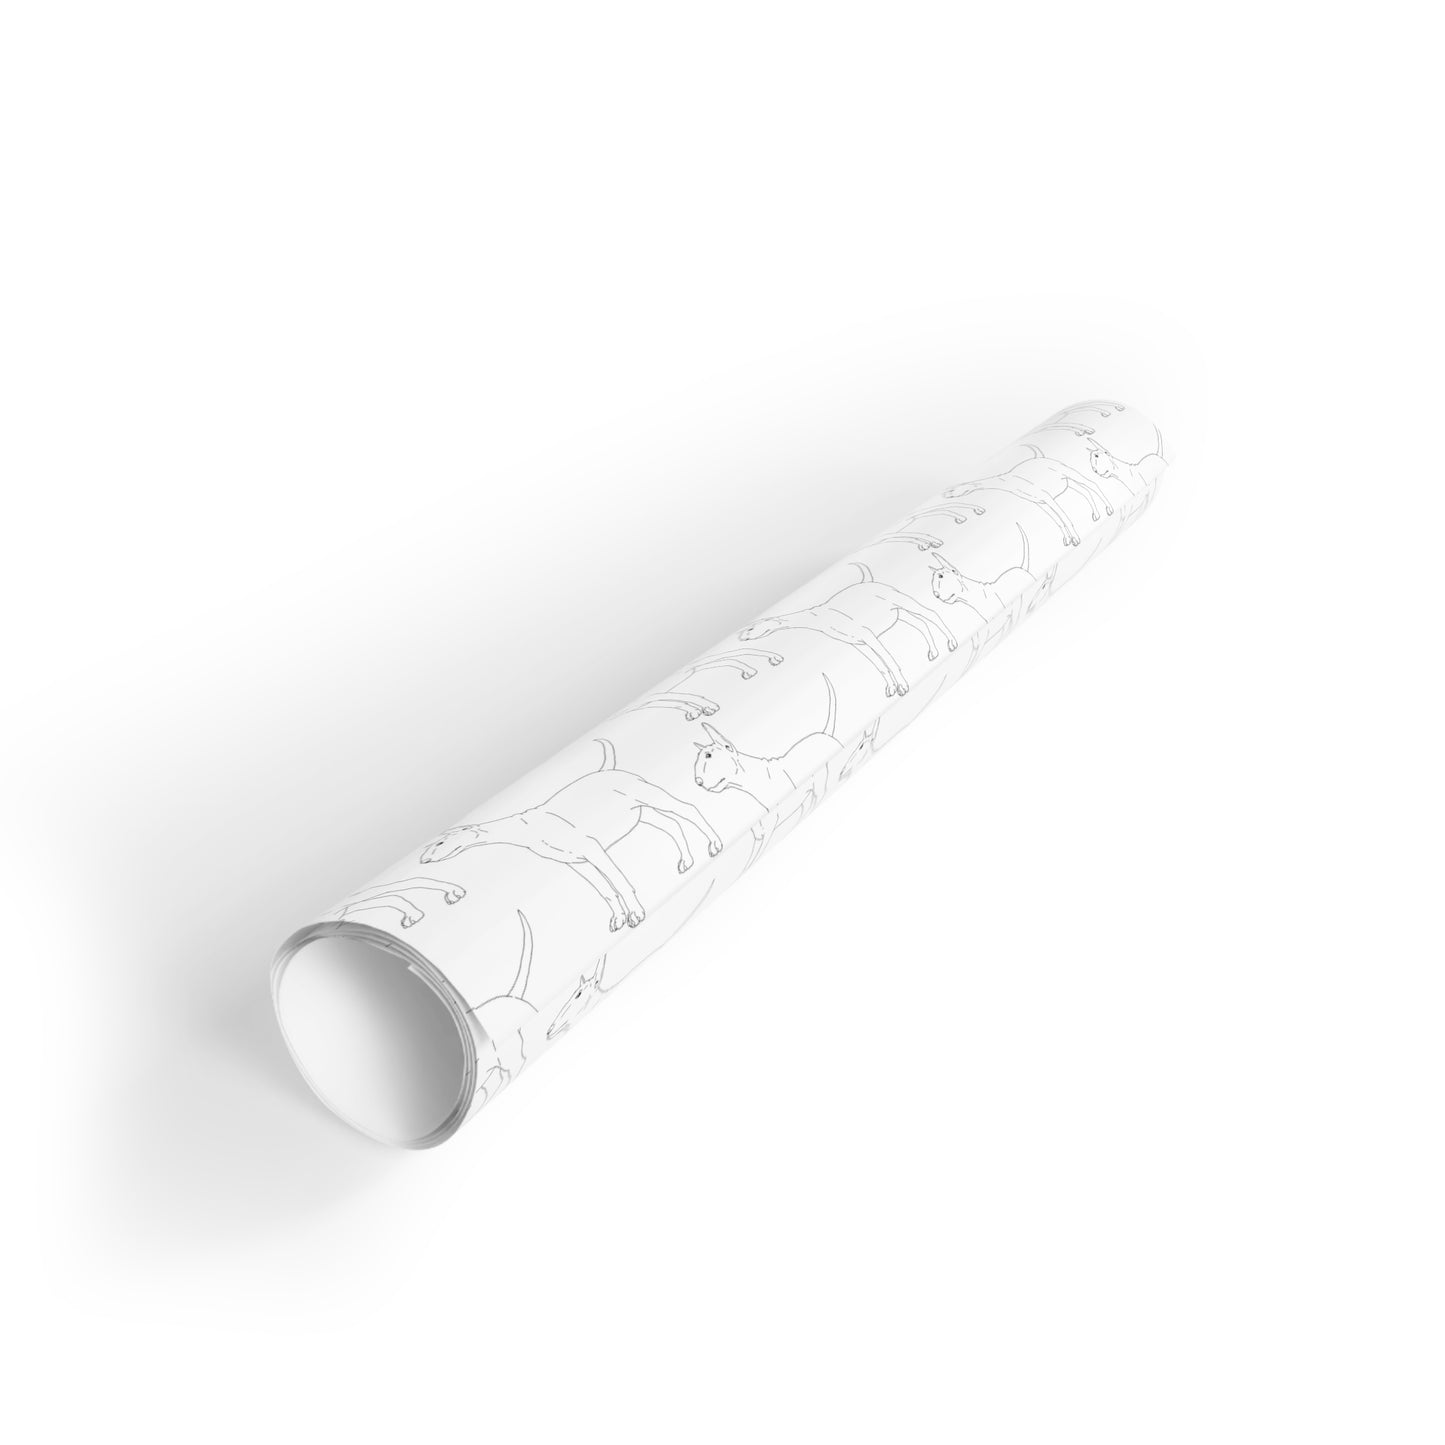 Bull Terrier Gift Wrapping Paper Rolls, 1pc